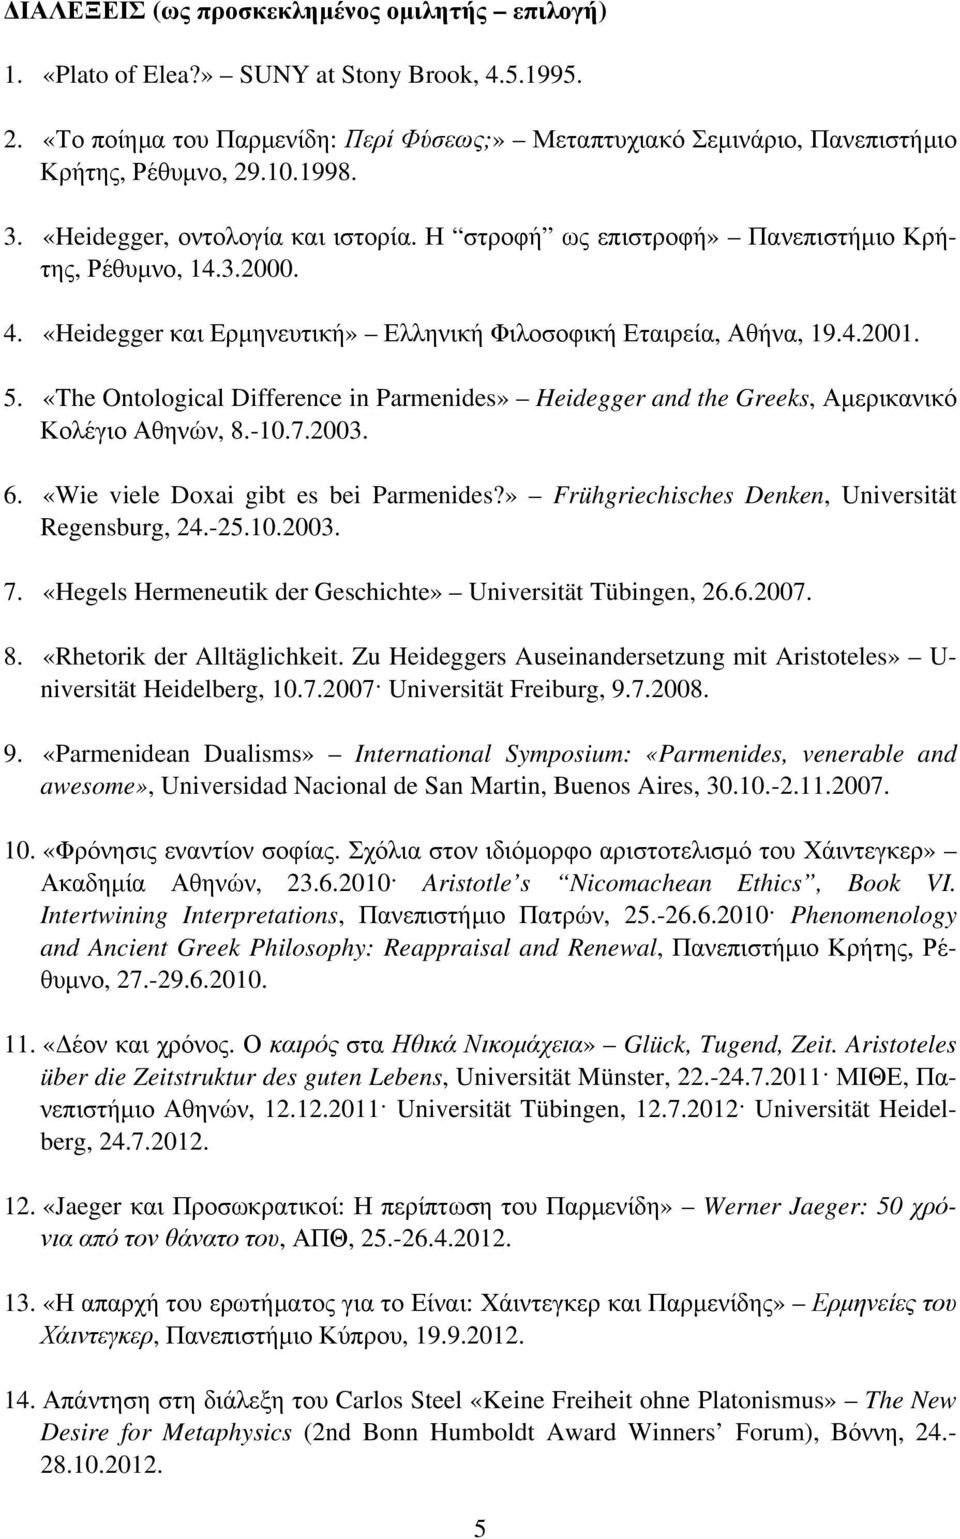 «The Ontological Difference in Parmenides» Heidegger and the Greeks, Αμερικανικό Κολέγιο Αθηνών, 8.-10.7.2003. 6. «Wie viele Doxai gibt es bei Parmenides?